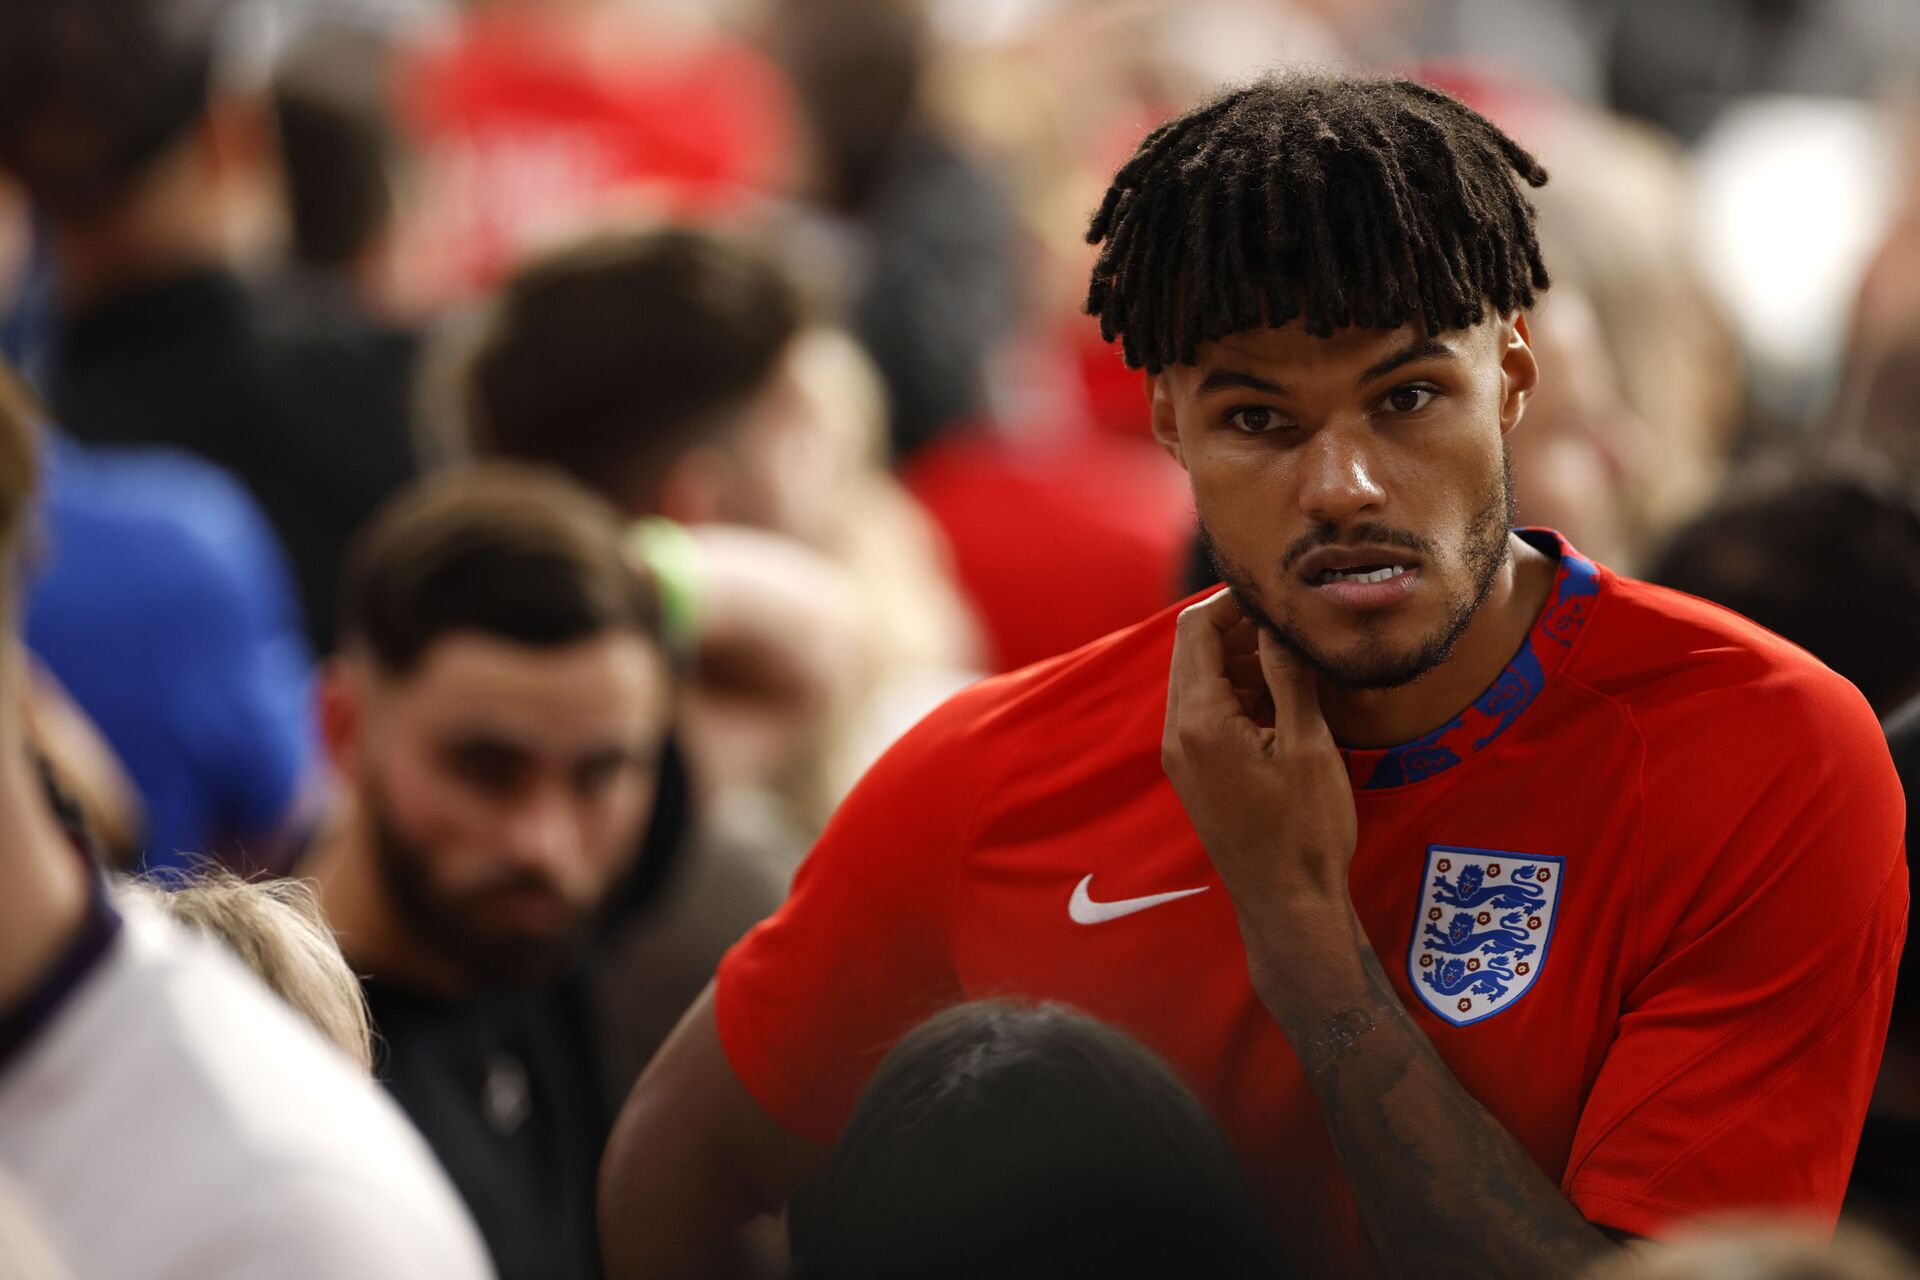 Soccer Football - Euro 2020 - Final - Italy v England - Wembley Stadium, London, Britain - July 11, 2021 England's Tyrone Mings looks dejected after the match  - Sputnik International, 1920, 07.09.2021